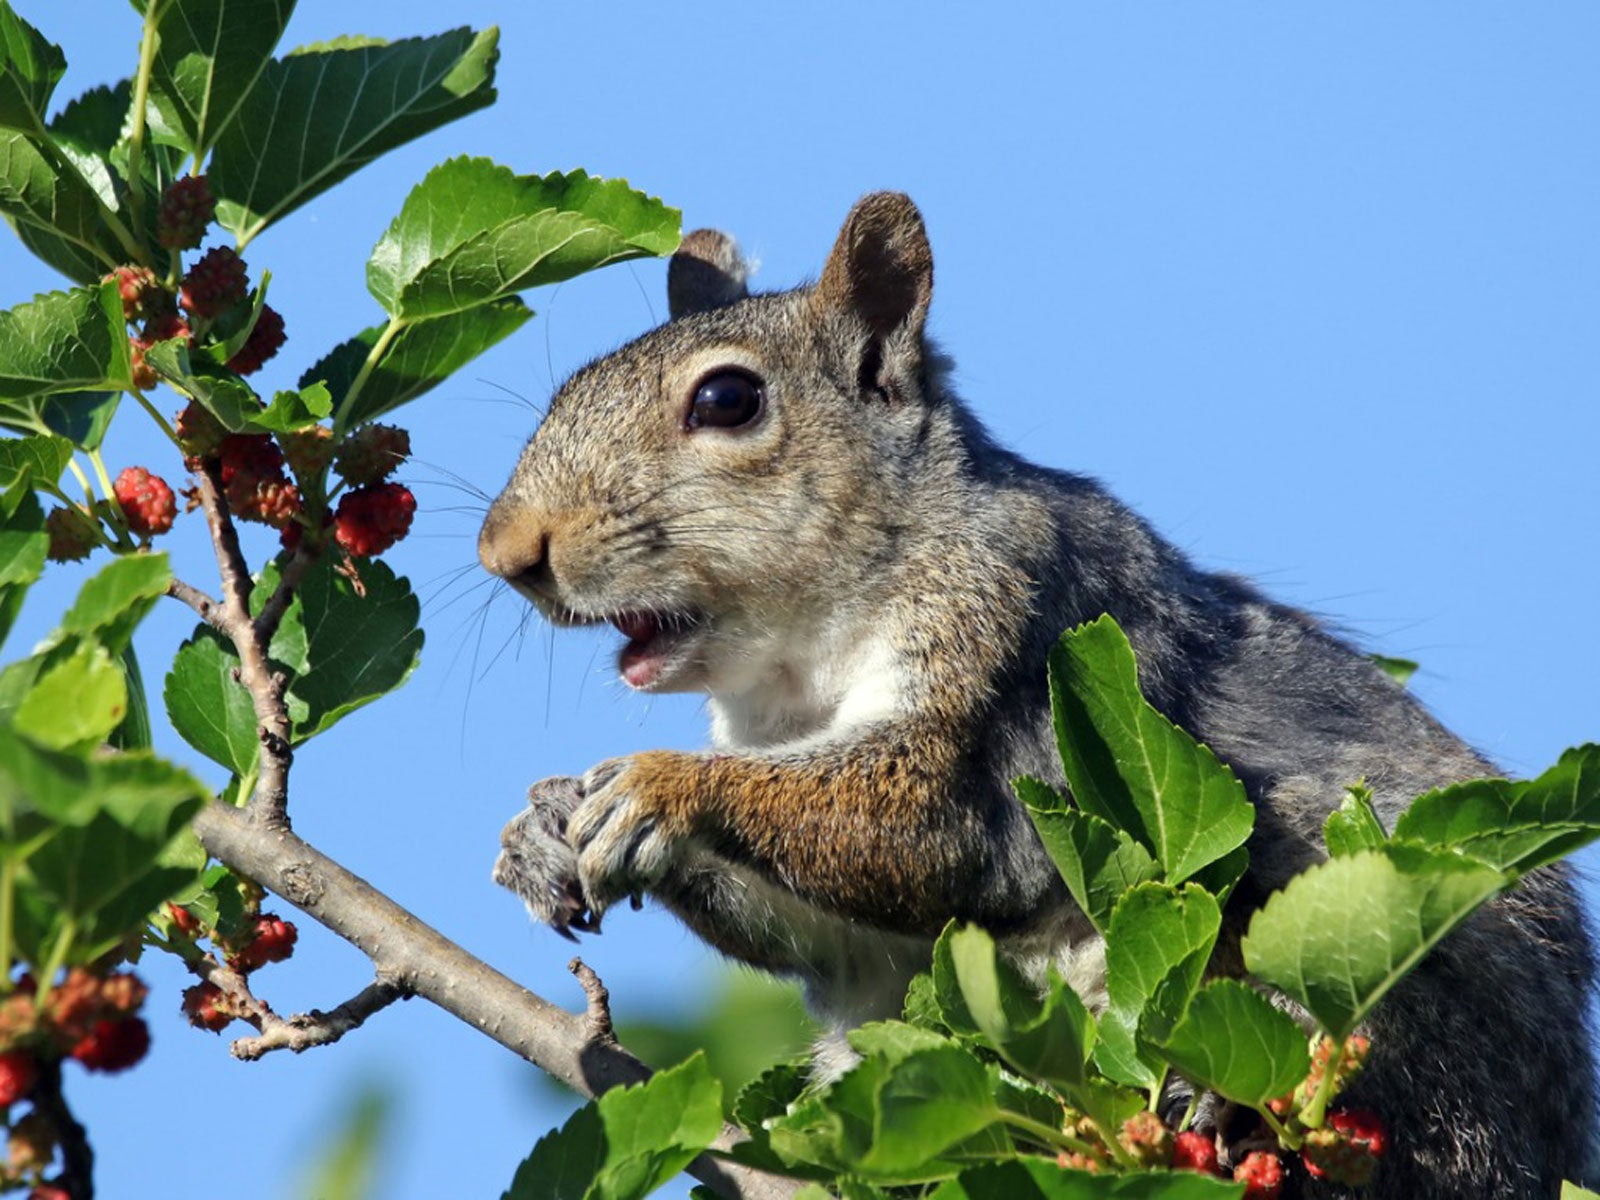 Squirrel Proofing Fruit Trees - How To Keep A Squirrel Out Of Fruit Trees